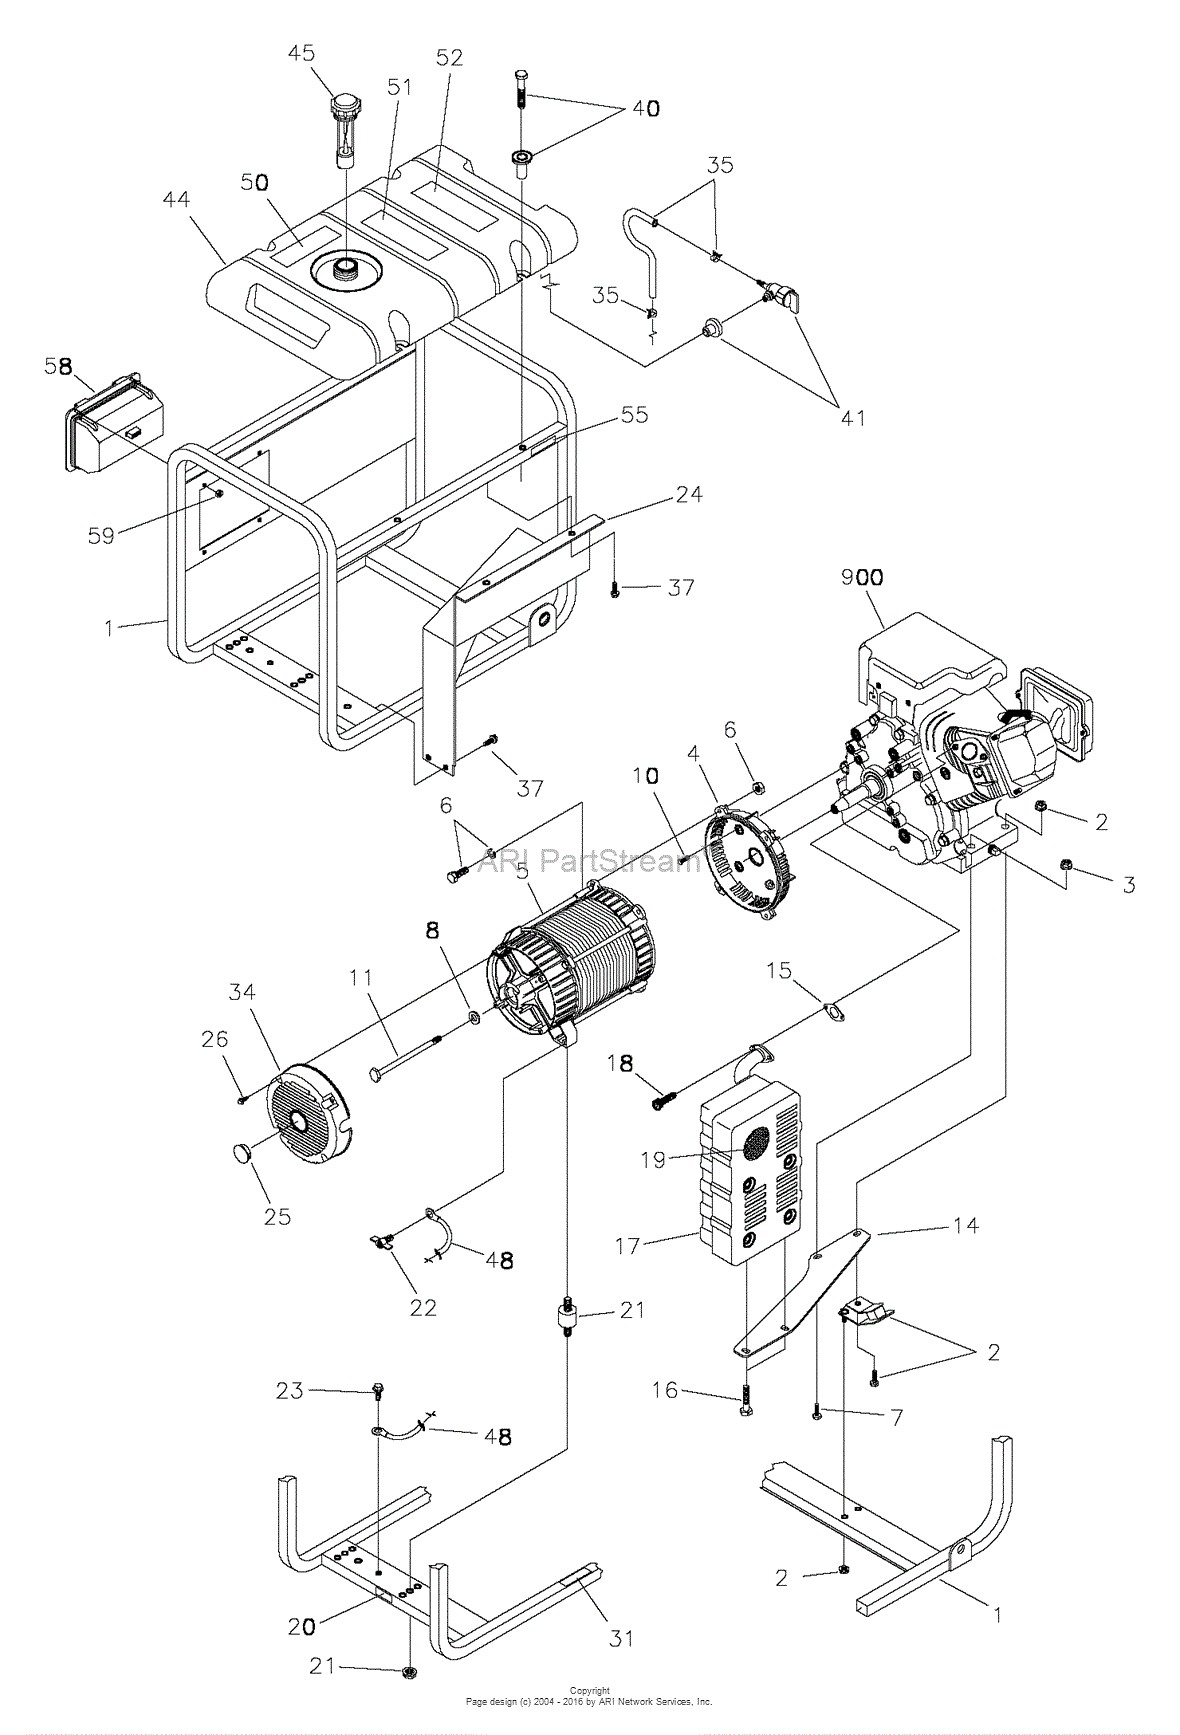 Briggs Stratton Engine Parts and Diagrams Briggs and Stratton Power Products 0 5 550 Watt Briggs Of Briggs Stratton Engine Parts and Diagrams